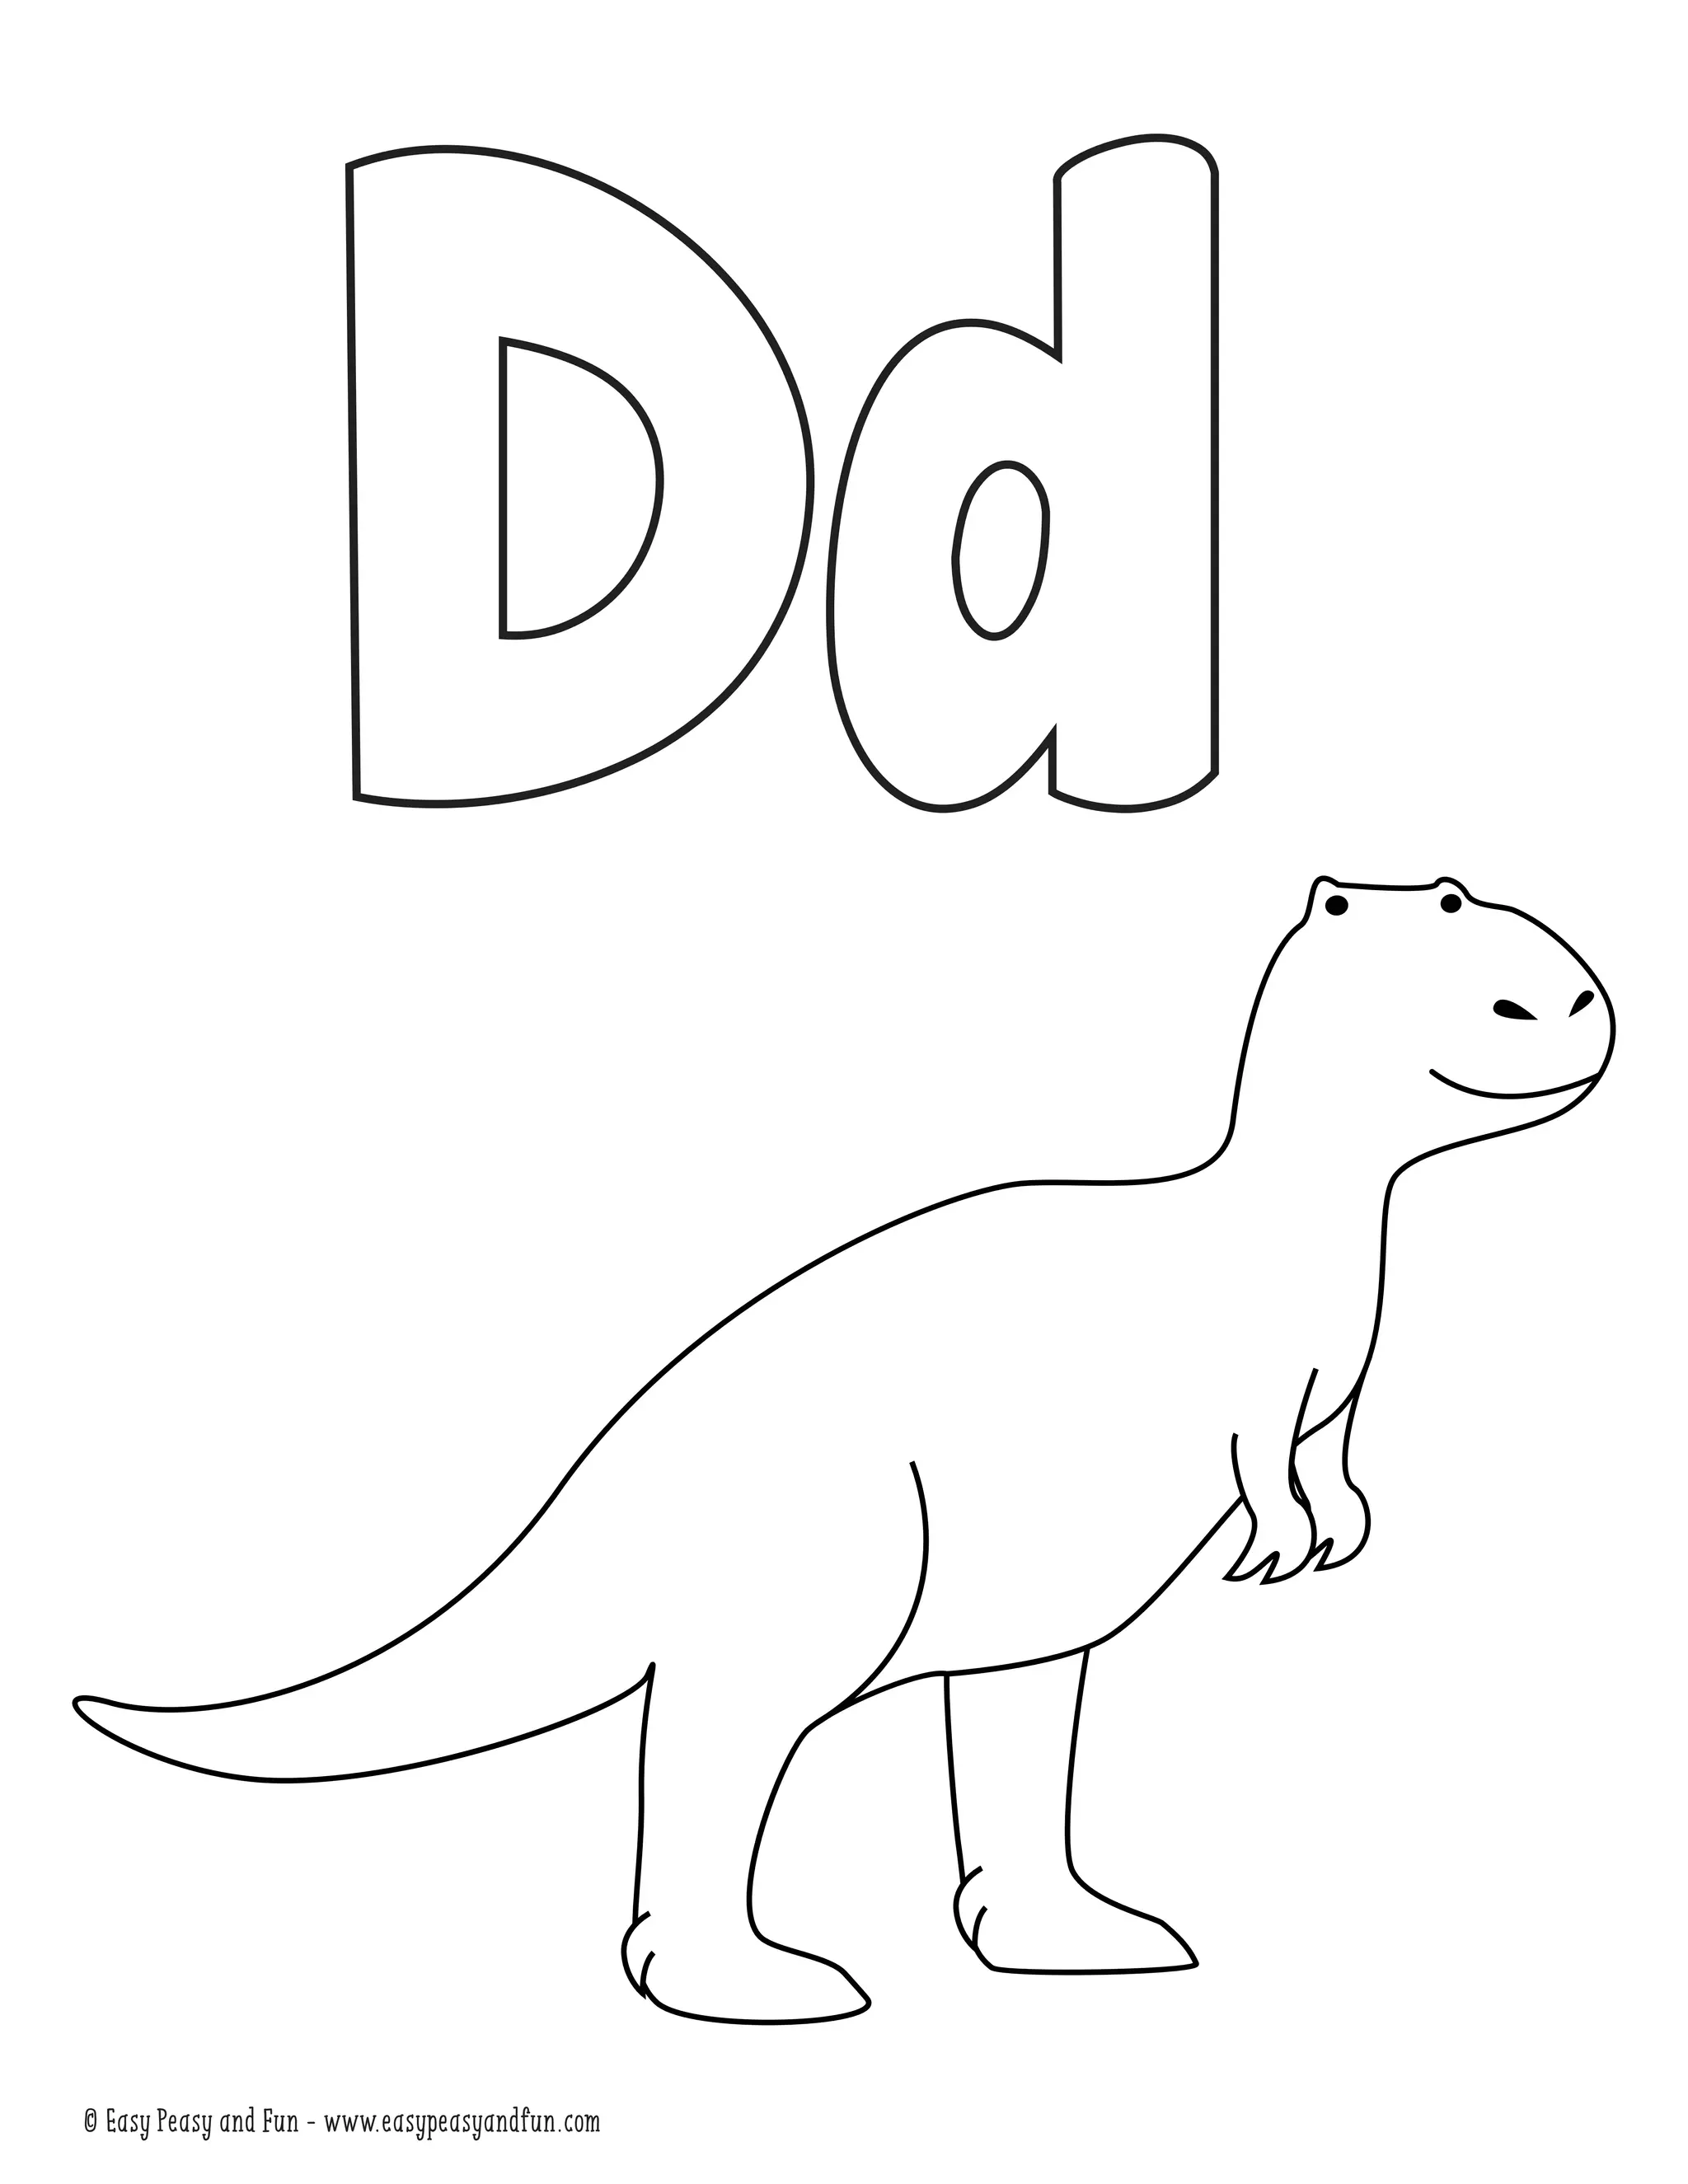 Alphabet coloring-pages